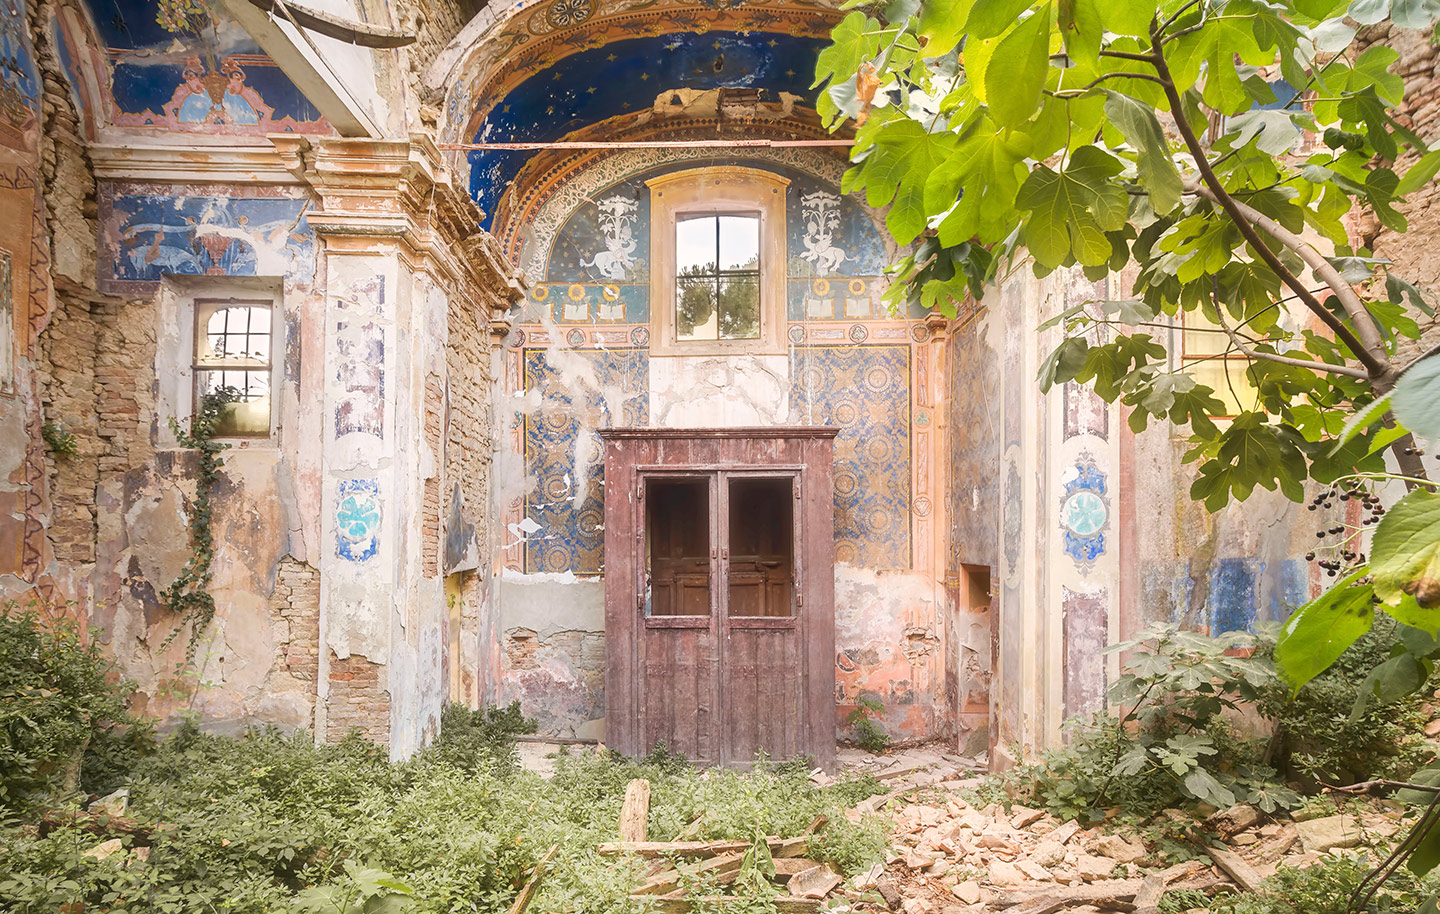 Abandoned Building Photos in Italy